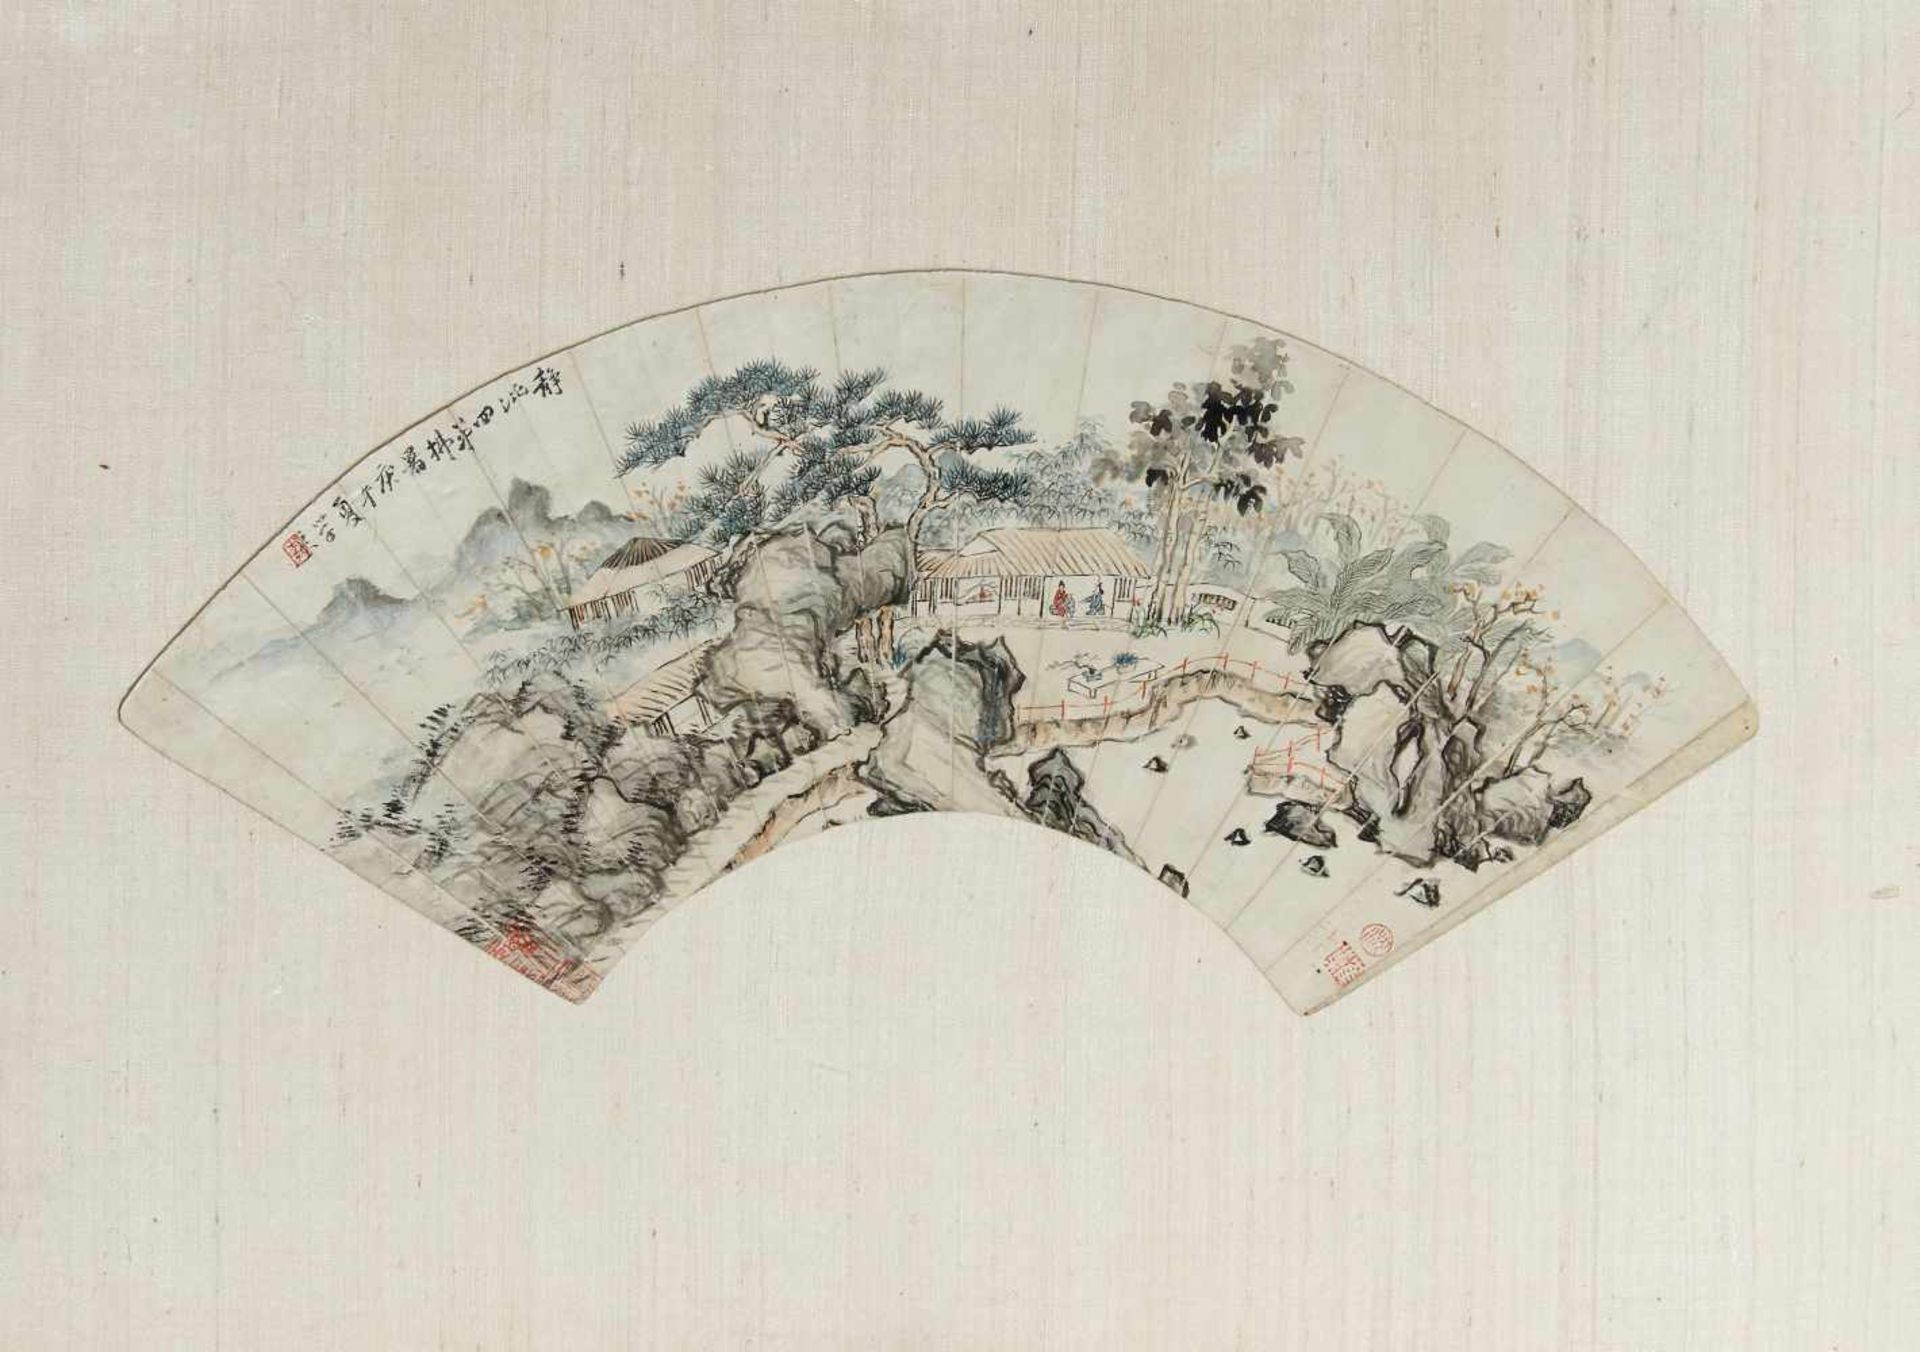 TWO FAN PAINTINGS. China. 19th c. Ink and color on paper. Mounted with passe-partout on cardboard, - Bild 2 aus 2